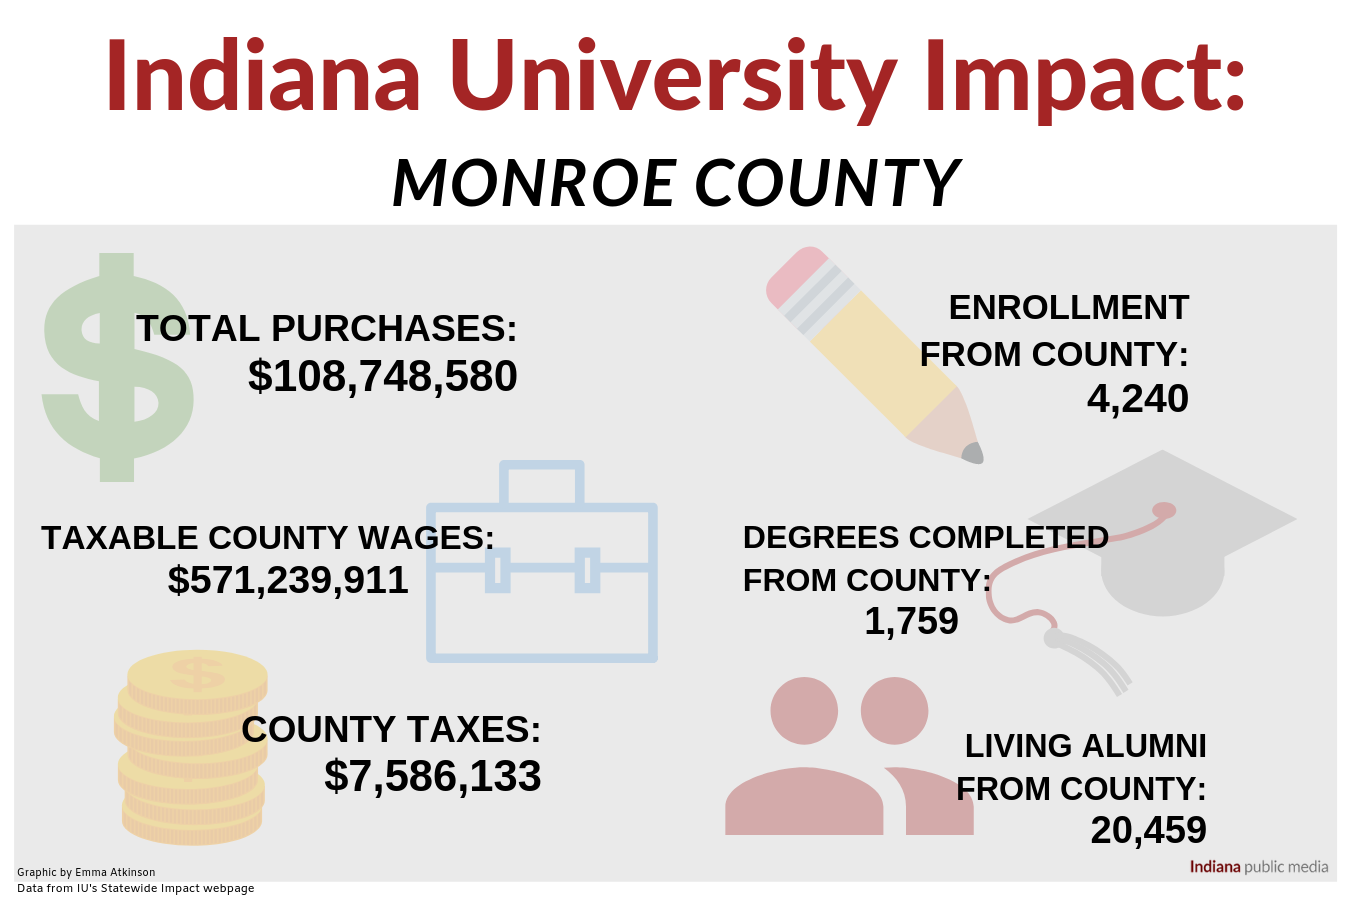 IU Impact data from the Statewide Impact webpage.